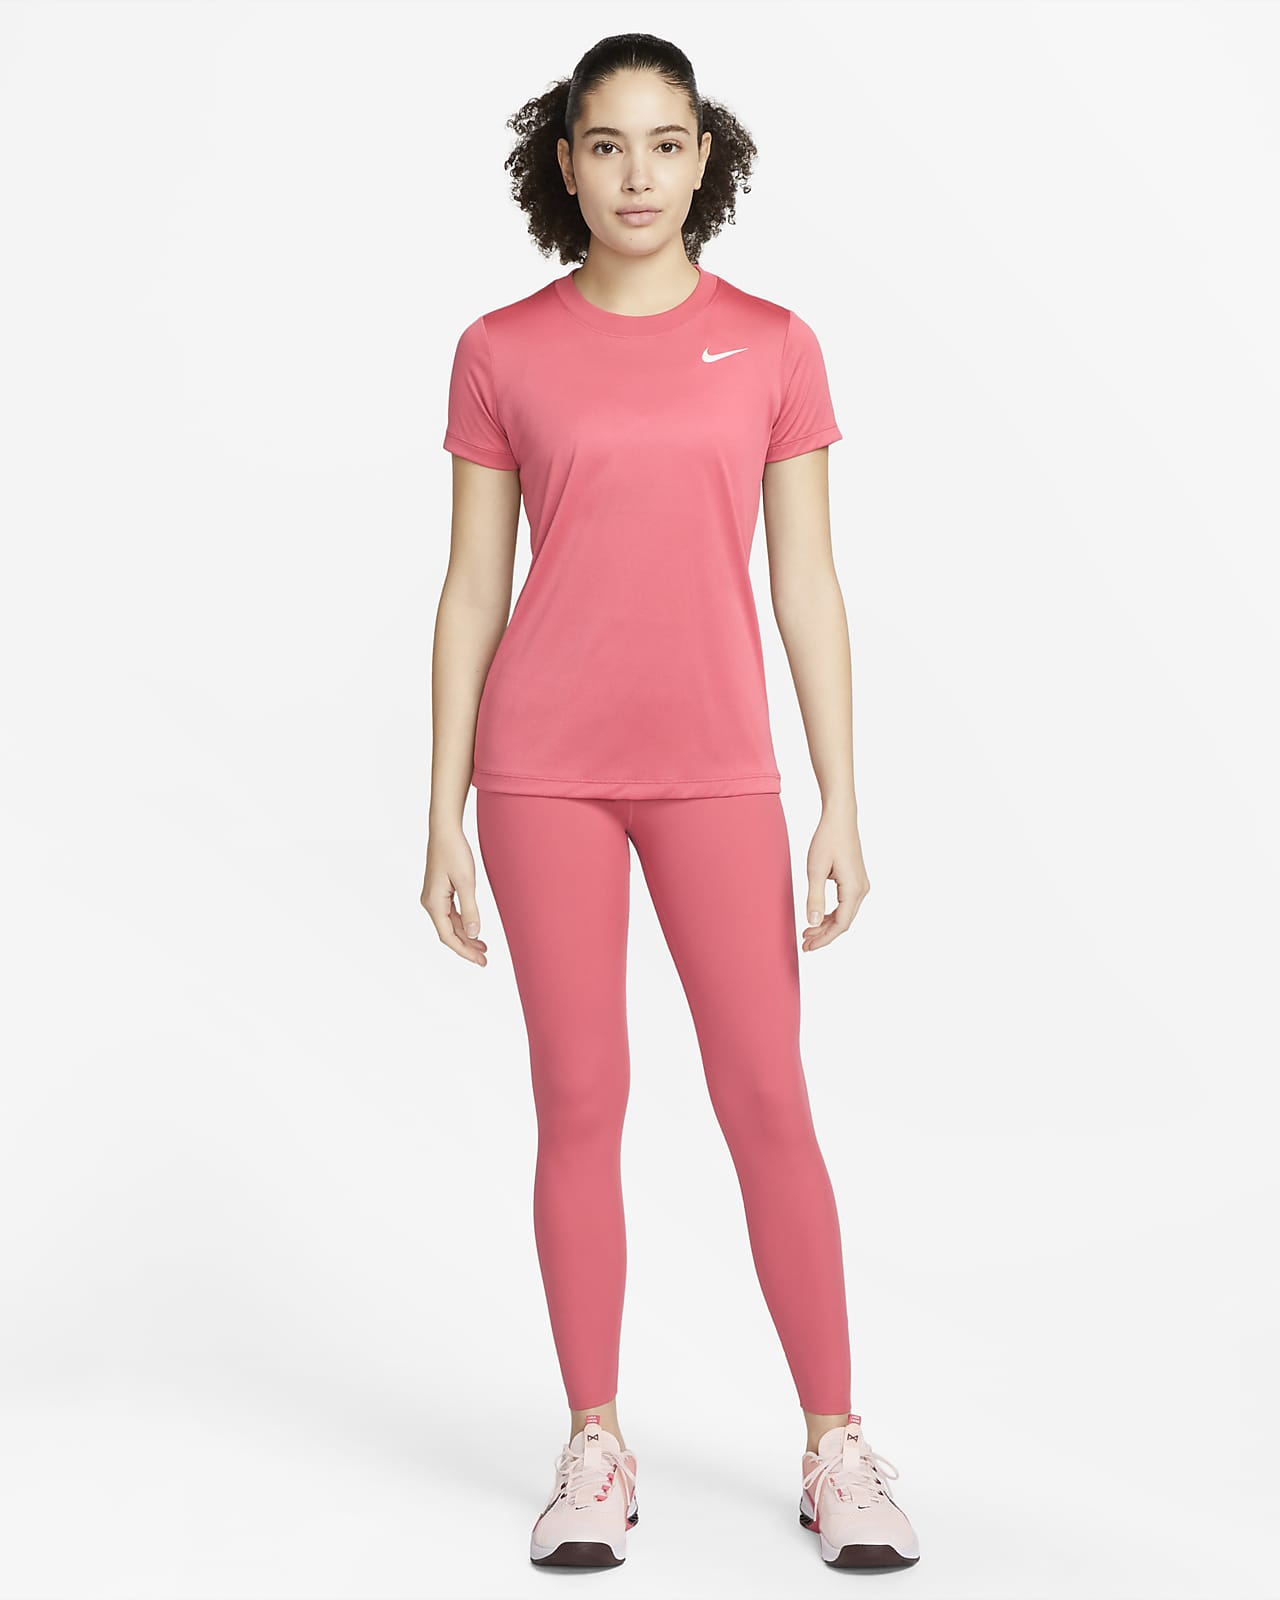 https://static.nike.com/a/images/t_PDP_1280_v1/f_auto,q_auto:eco/e1cf9265-3566-4bf4-b573-625767a3422b/one-luxe-womens-mid-rise-7-8-leggings-mjXgMk.png